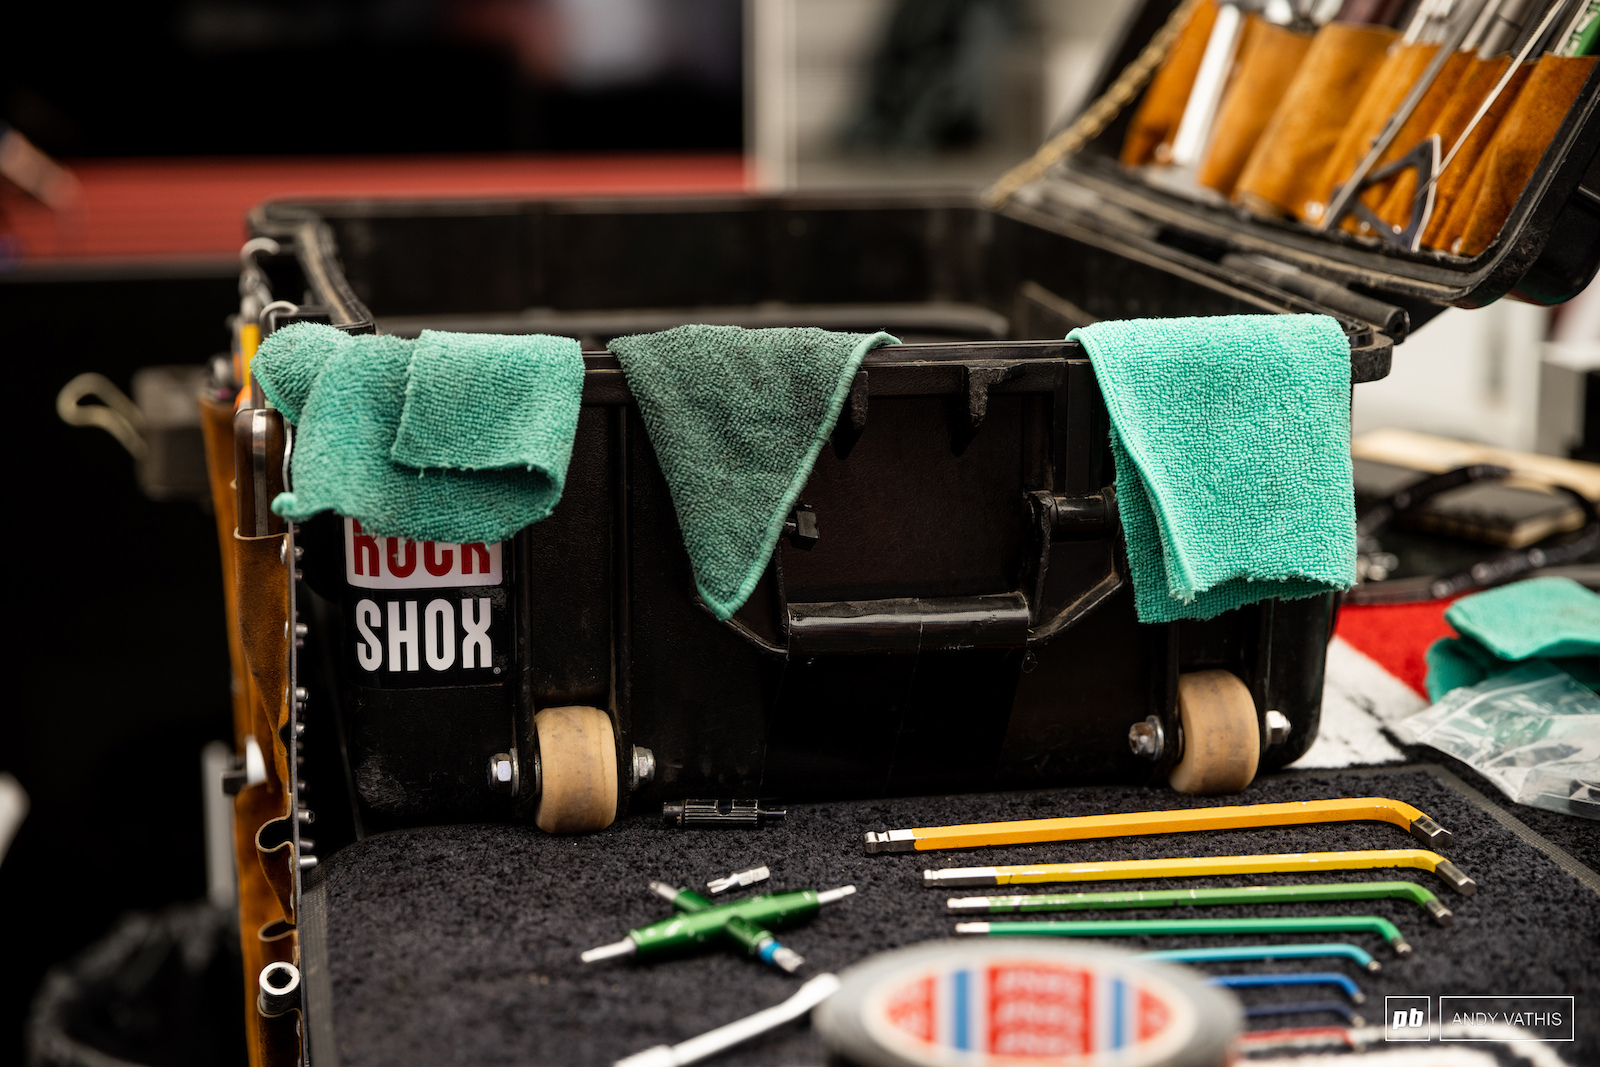 Skateboard wheels are proven to be a superior upgrade on any tool case.